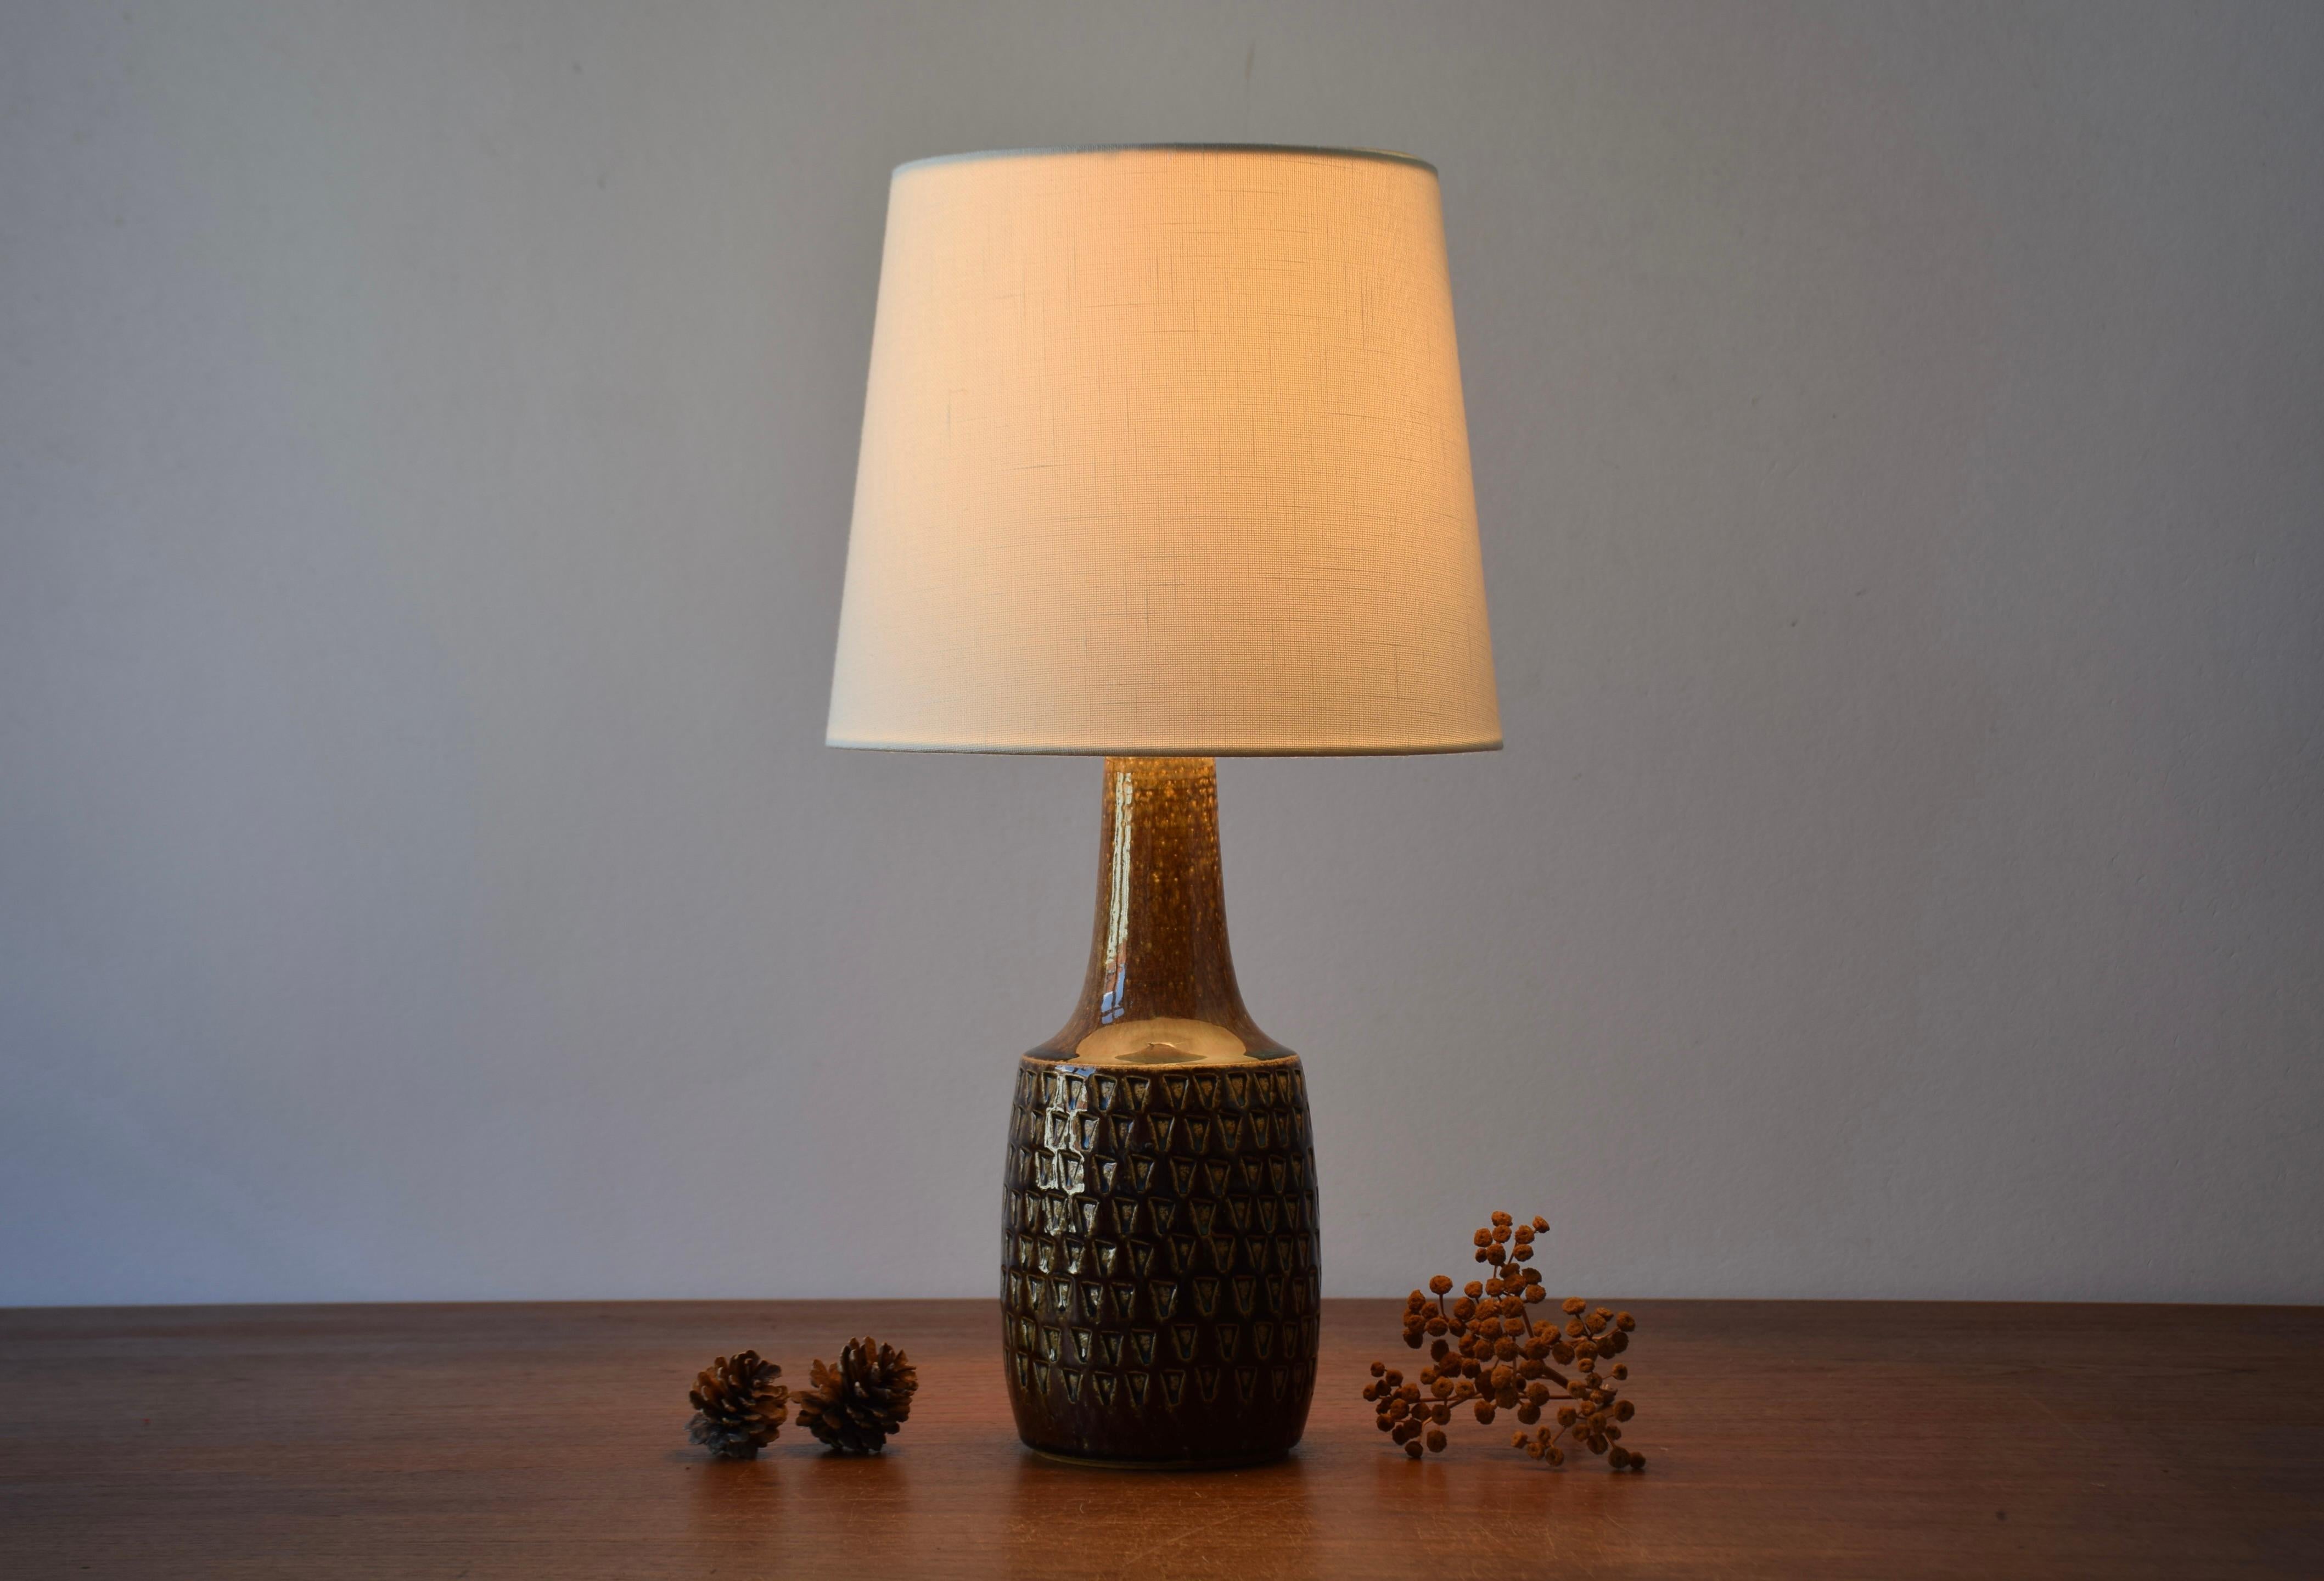 Ceramic table lamp manufactured by Søholm Stentøj, Denmark, circa 1960s. It features a shiny brown glaze on a textured body and has beautiful blue elements.

The lamp is marked on bottom with Søholm Bornholm Stentøj Denmark and number 3001.

The